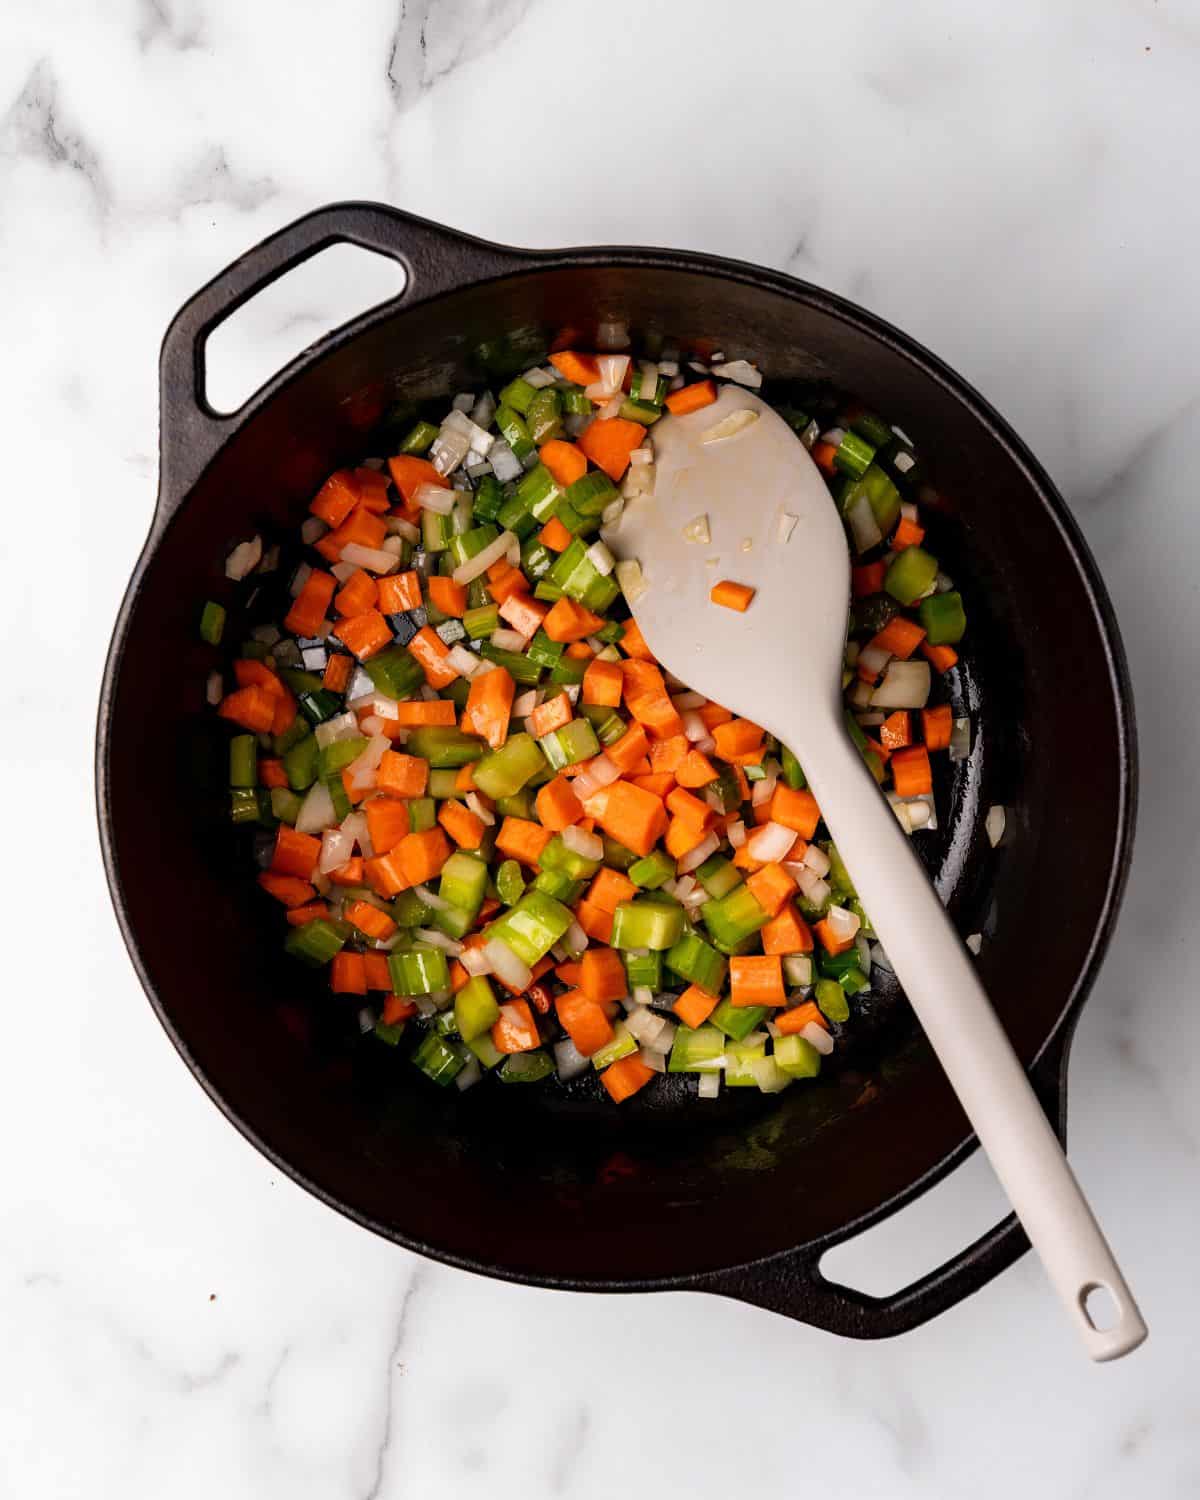 carrots, celery, onions cooked in a soup pot